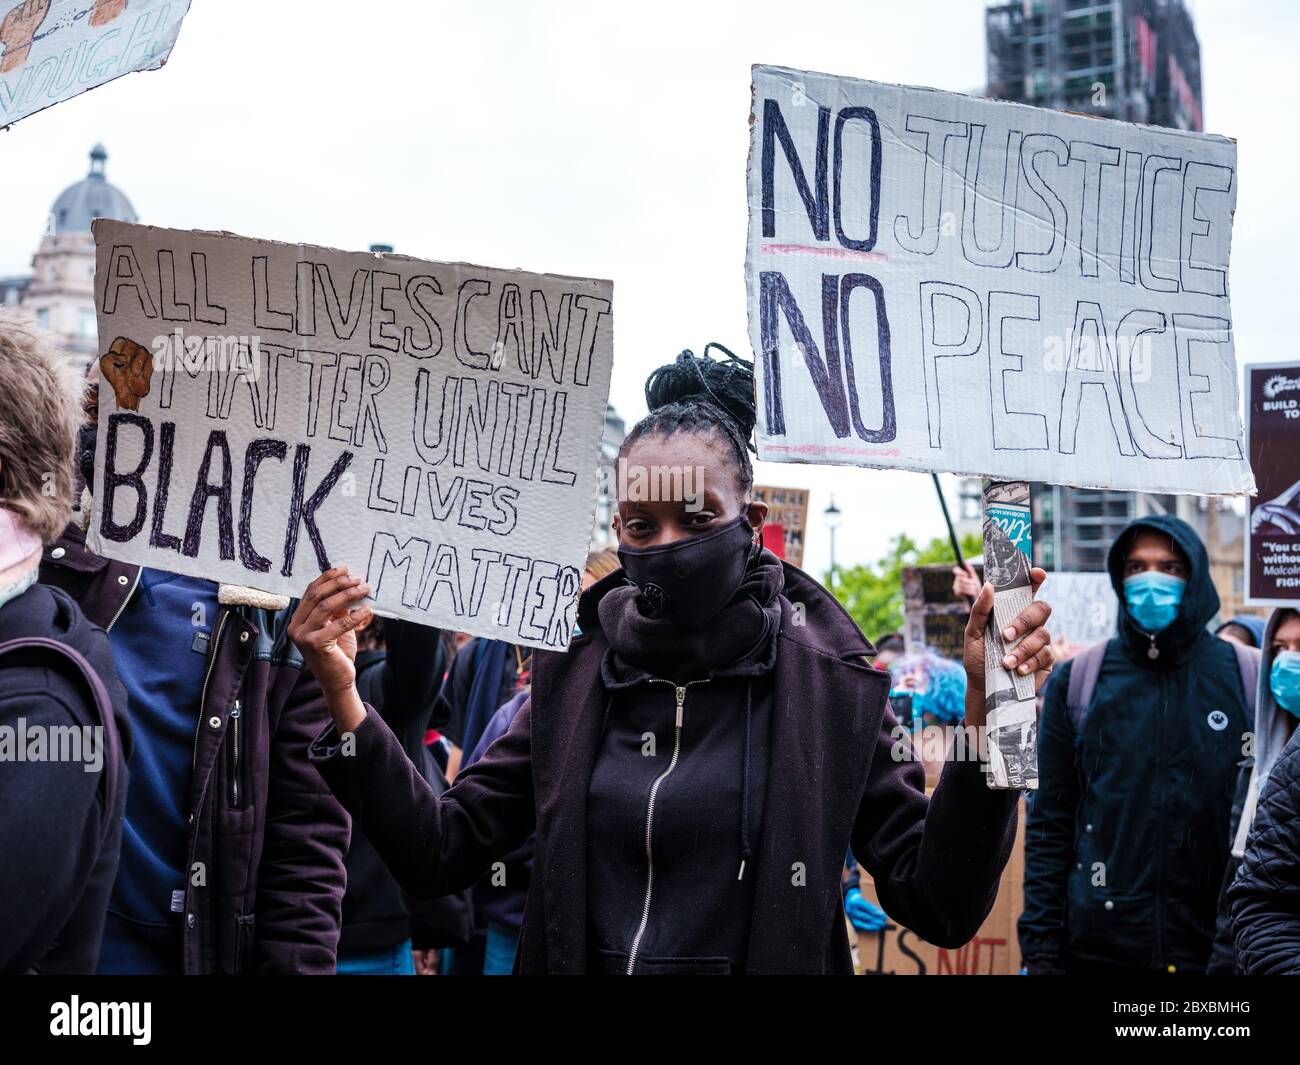 London, UK. 6th June, 2020. A protestor holds two placards during the Black Lives Matter Protest in Parliament Square in London.  In memory of George Floyd who was killed on the 25th May while in police custody in the US city of Minneapolis. Credit: Yousef Al Nasser/Alamy Live News. Stock Photo